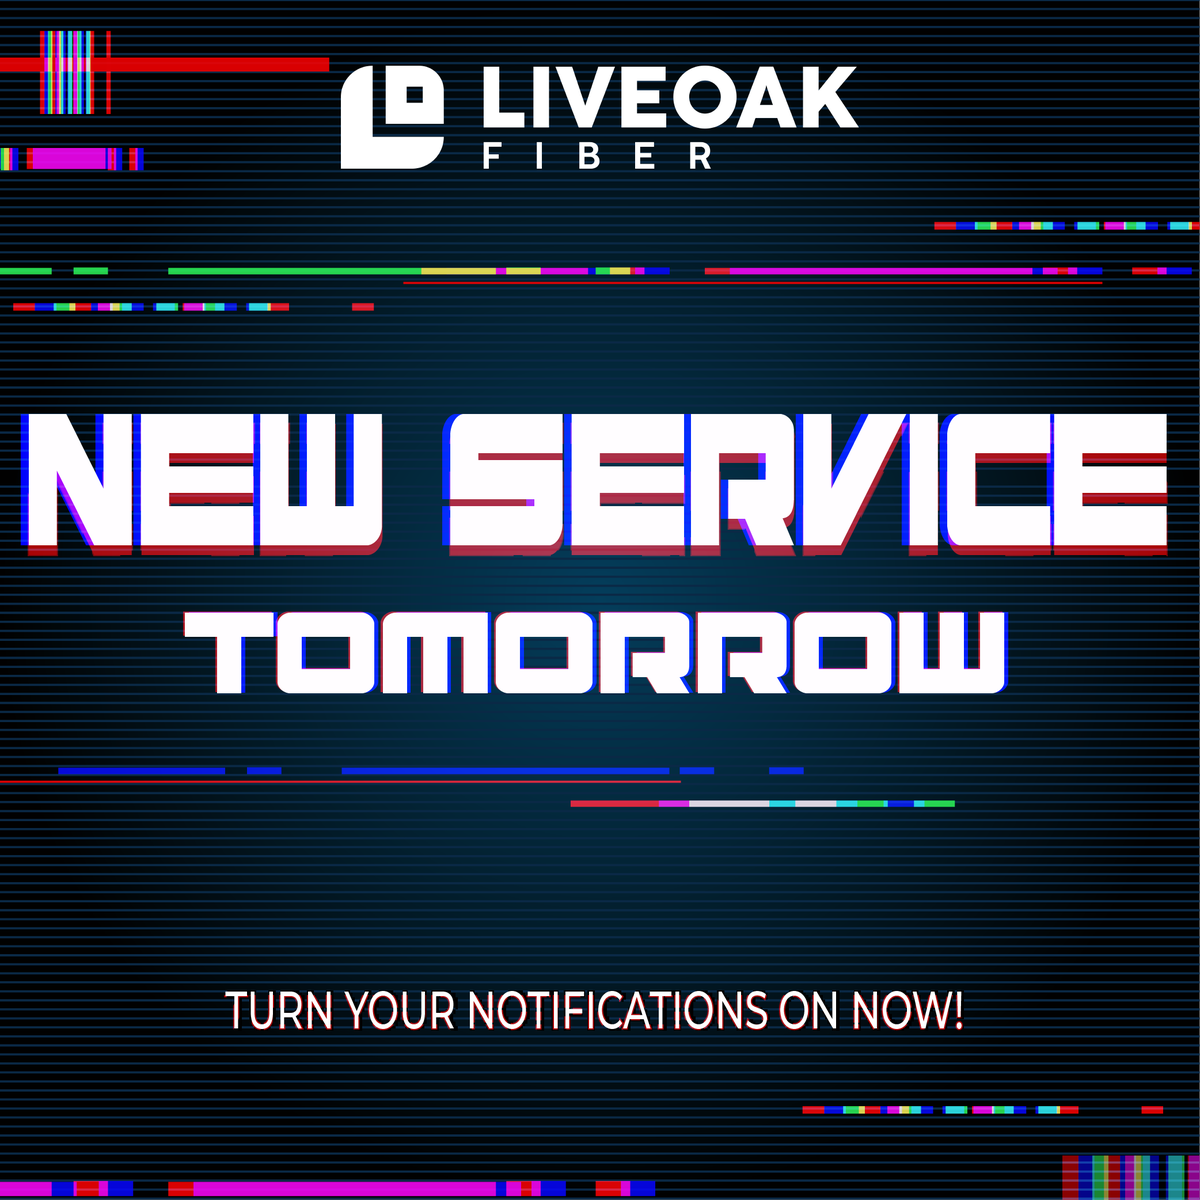 Exciting news ahead! 📣Tomorrow, we'll be unveiling a new service! Be sure to stay tuned by turning on your notifications—you won't want to miss out on this! 🎉 #BetterInternetNow #NewService